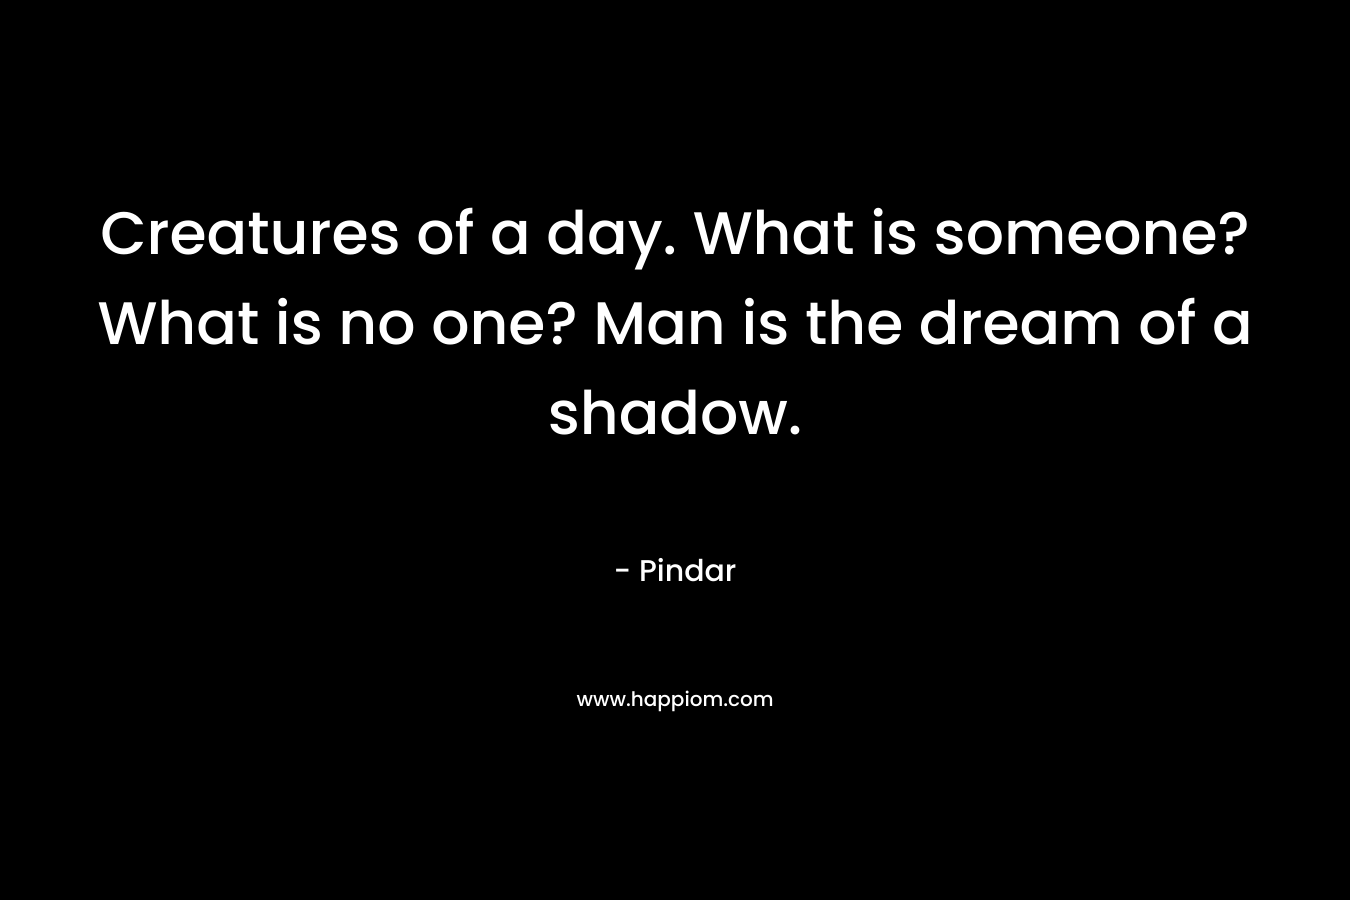 Creatures of a day. What is someone? What is no one? Man is the dream of a shadow. – Pindar